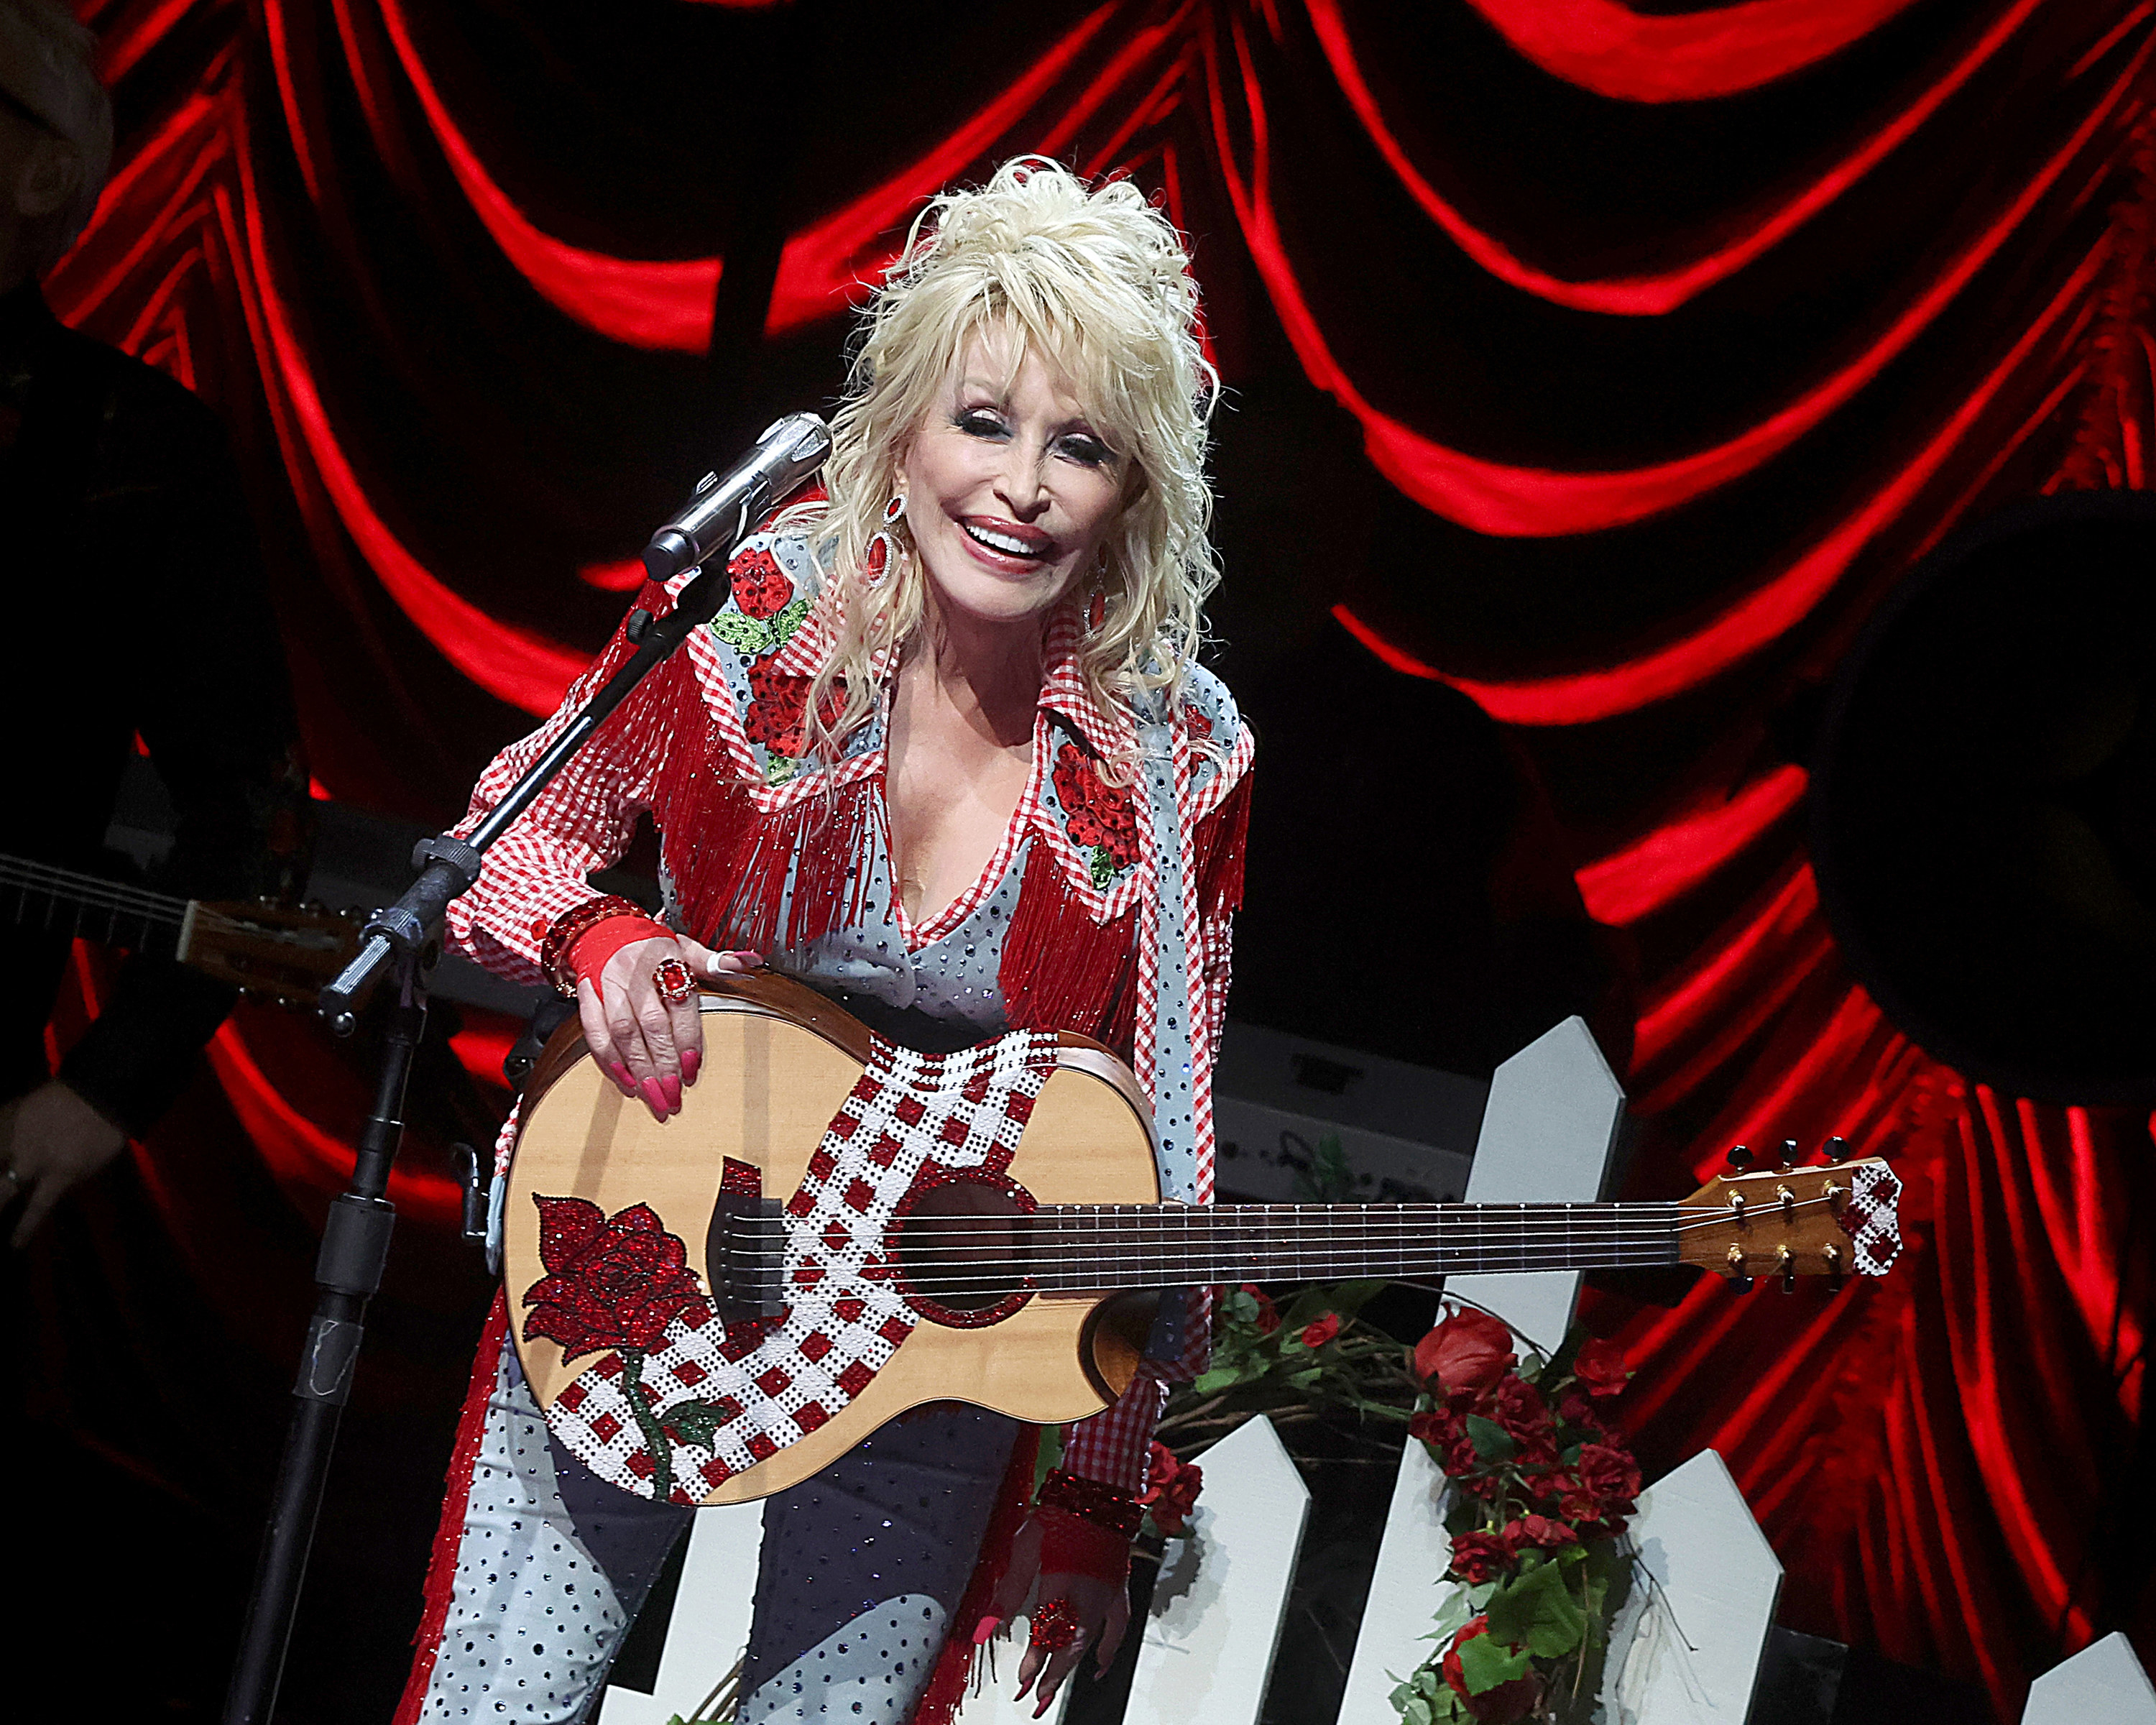 Dolly onstage with a guitar